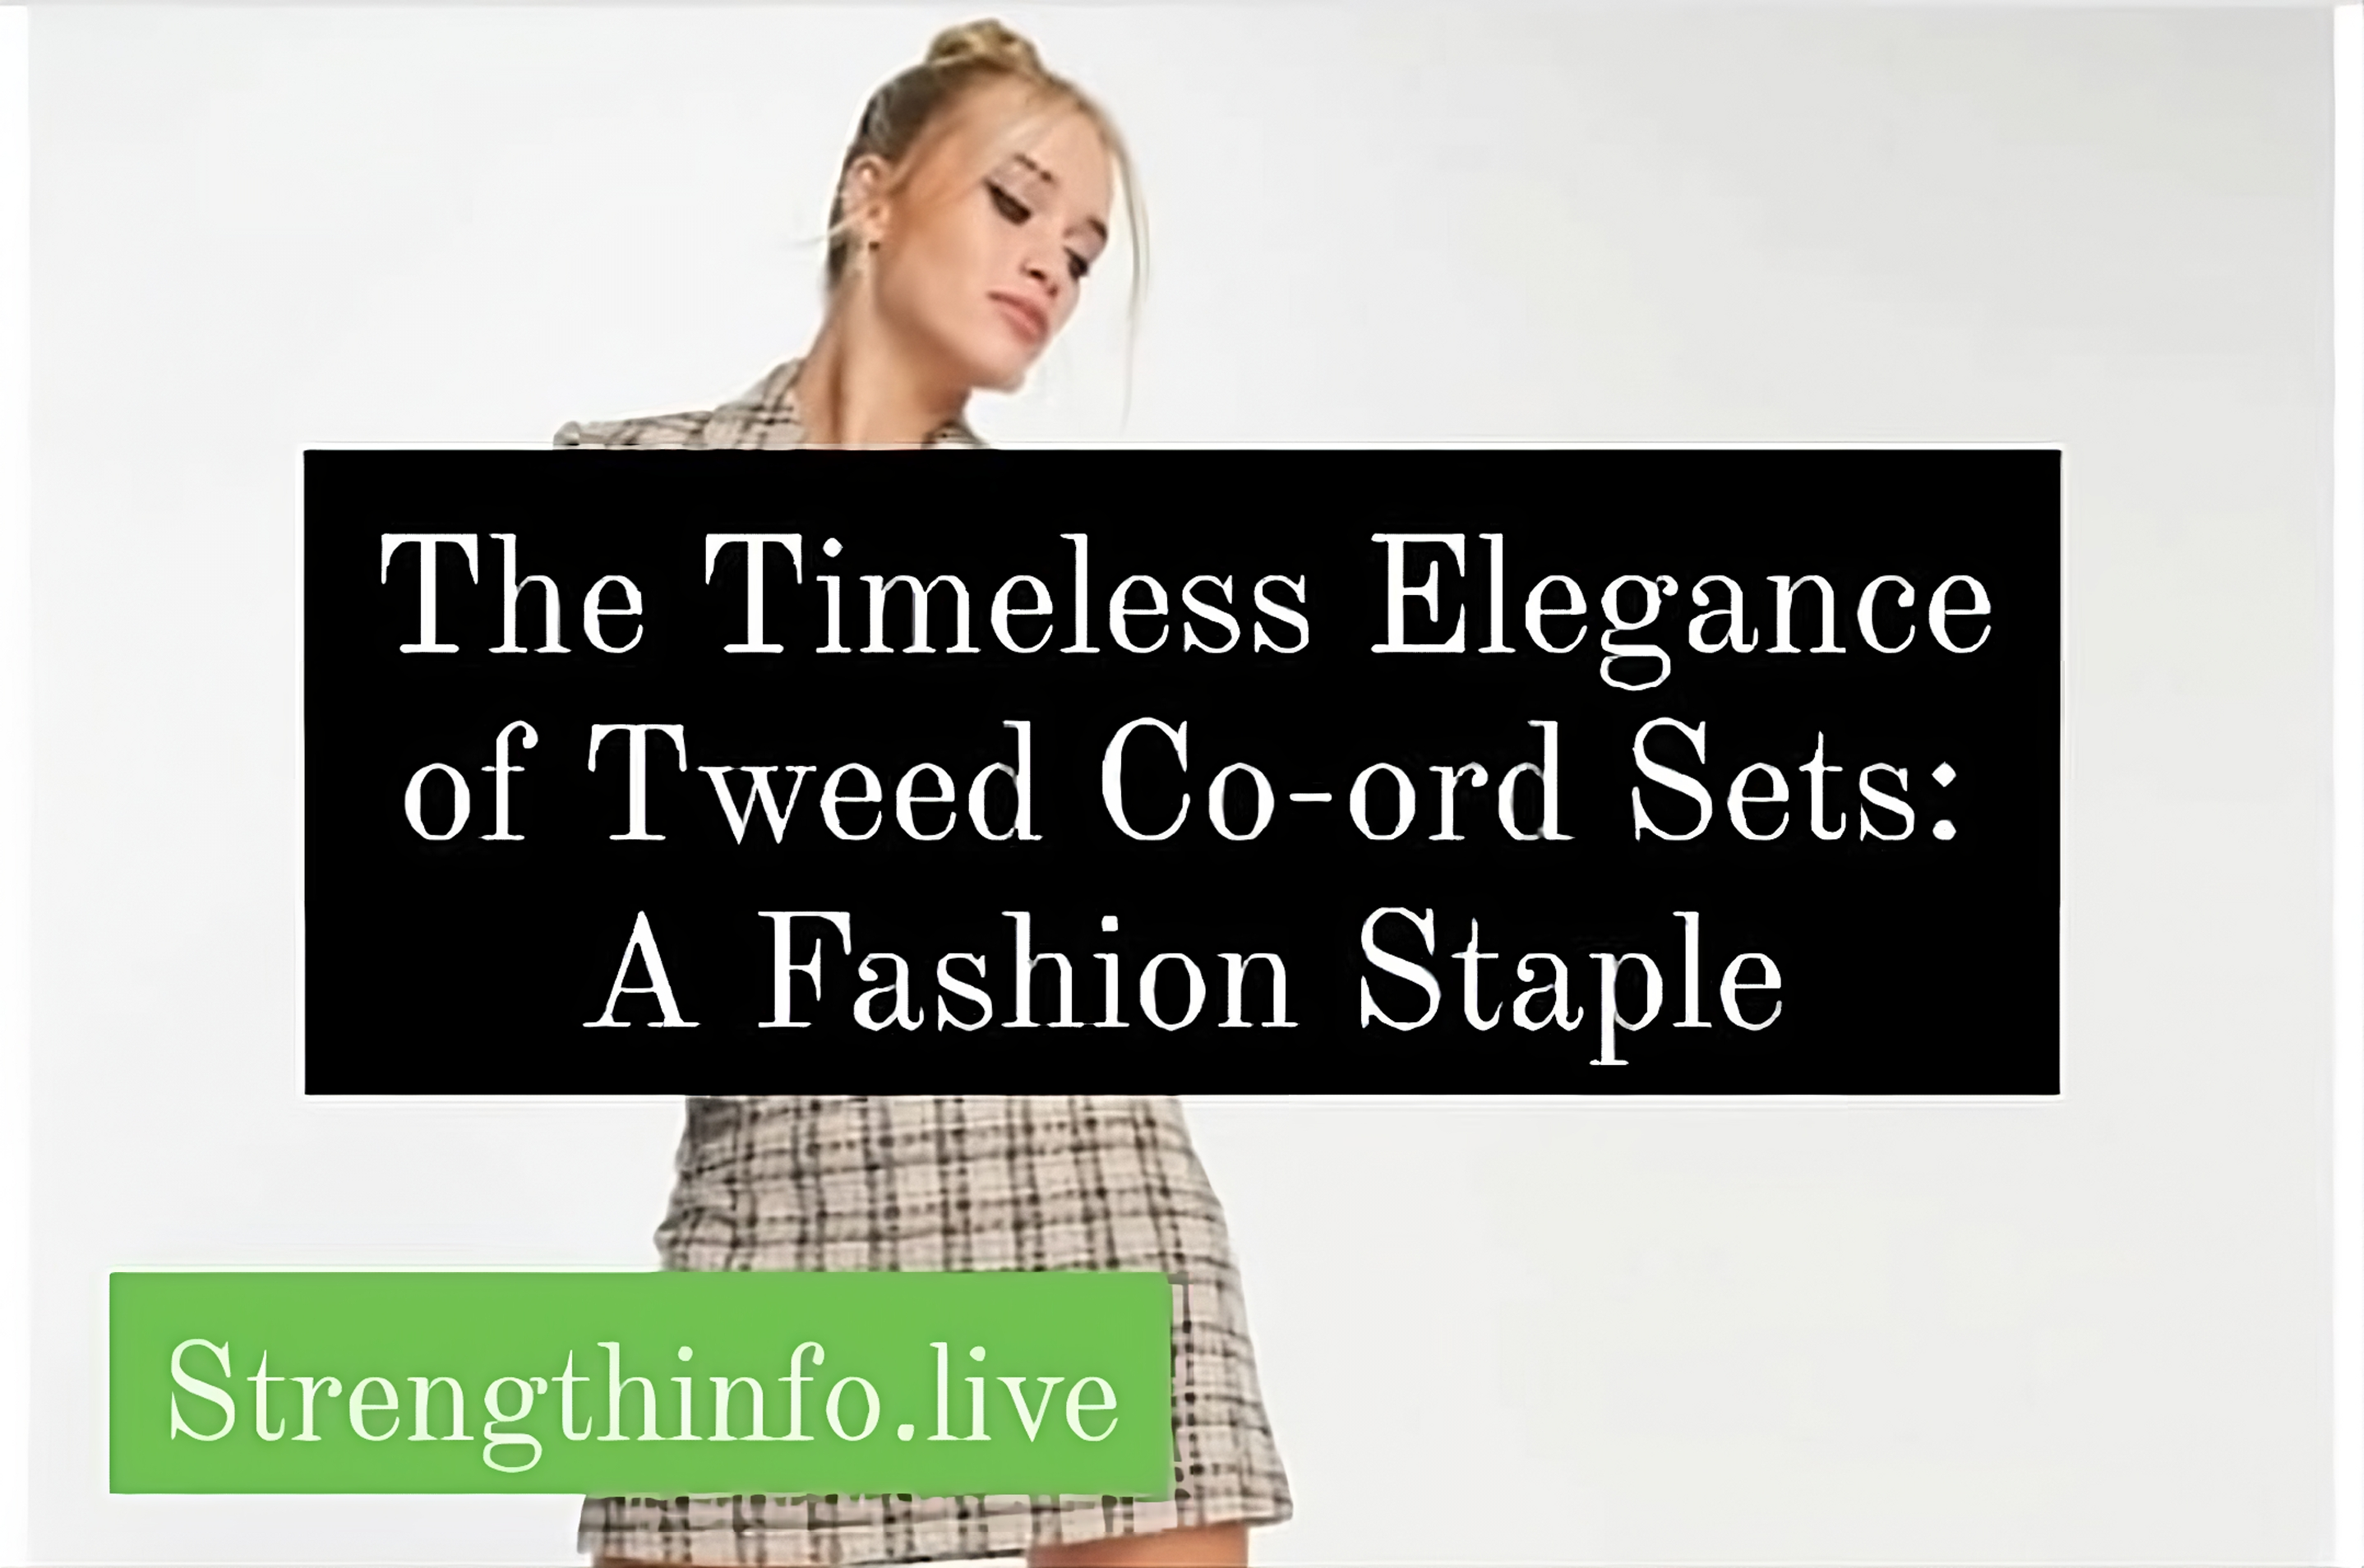 The Timeless Elegance of Tweed Co-ord Sets: A Fashion Staple